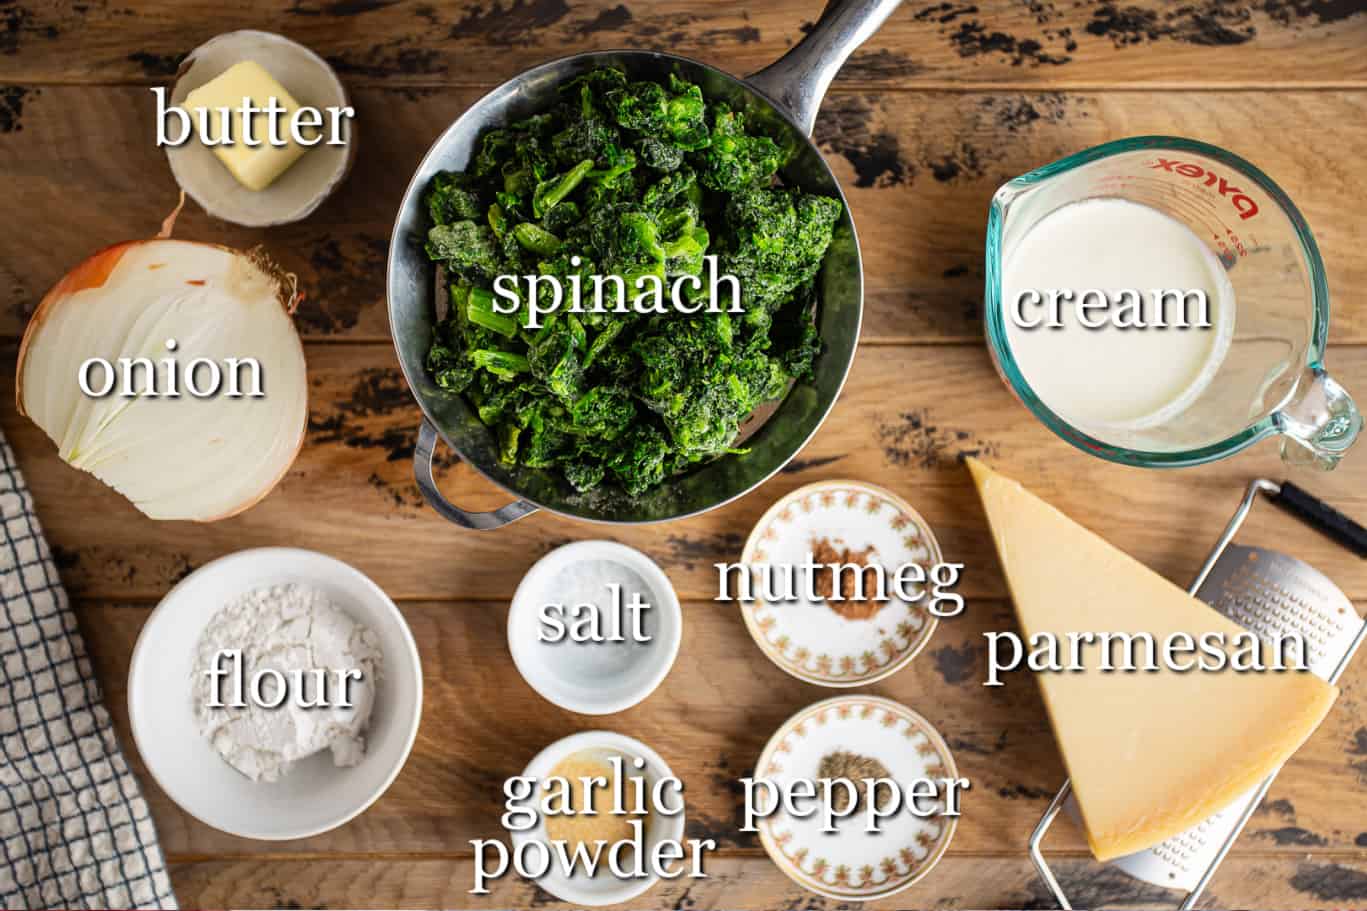 Ingredients for making creamed spinach, with text labels.